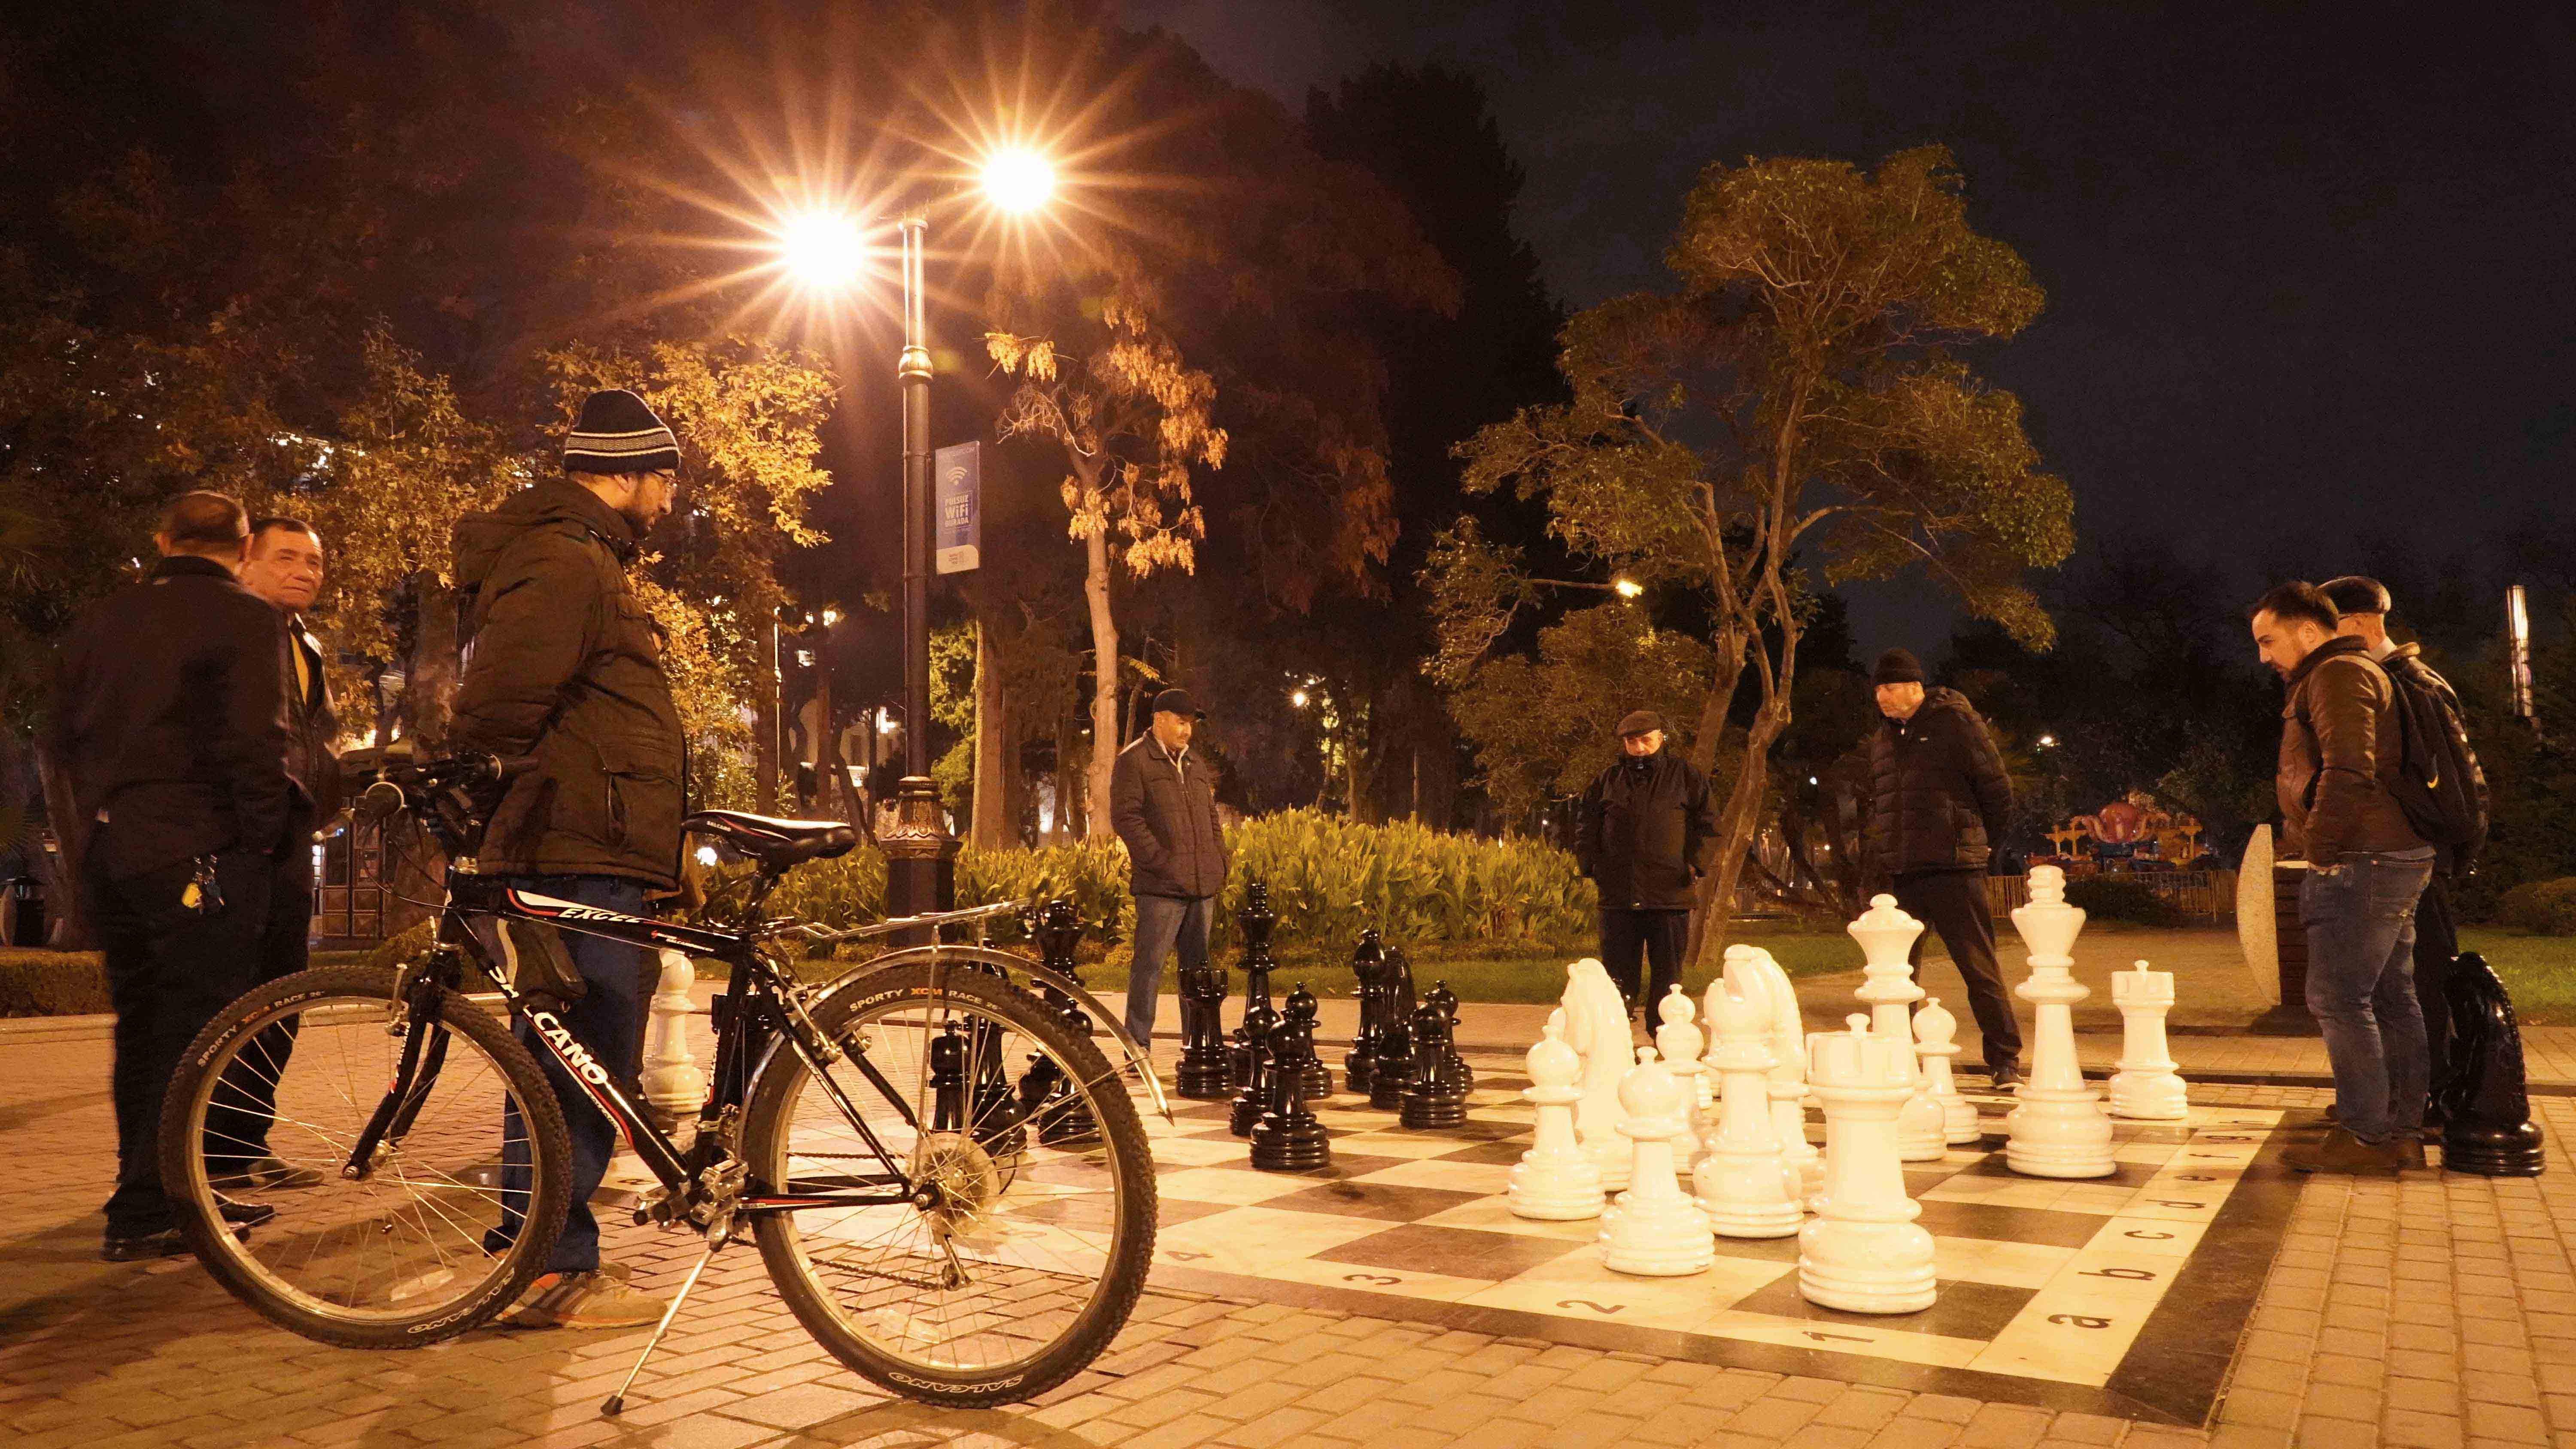 Fuad observing citizens playing chess in the central park of Baku